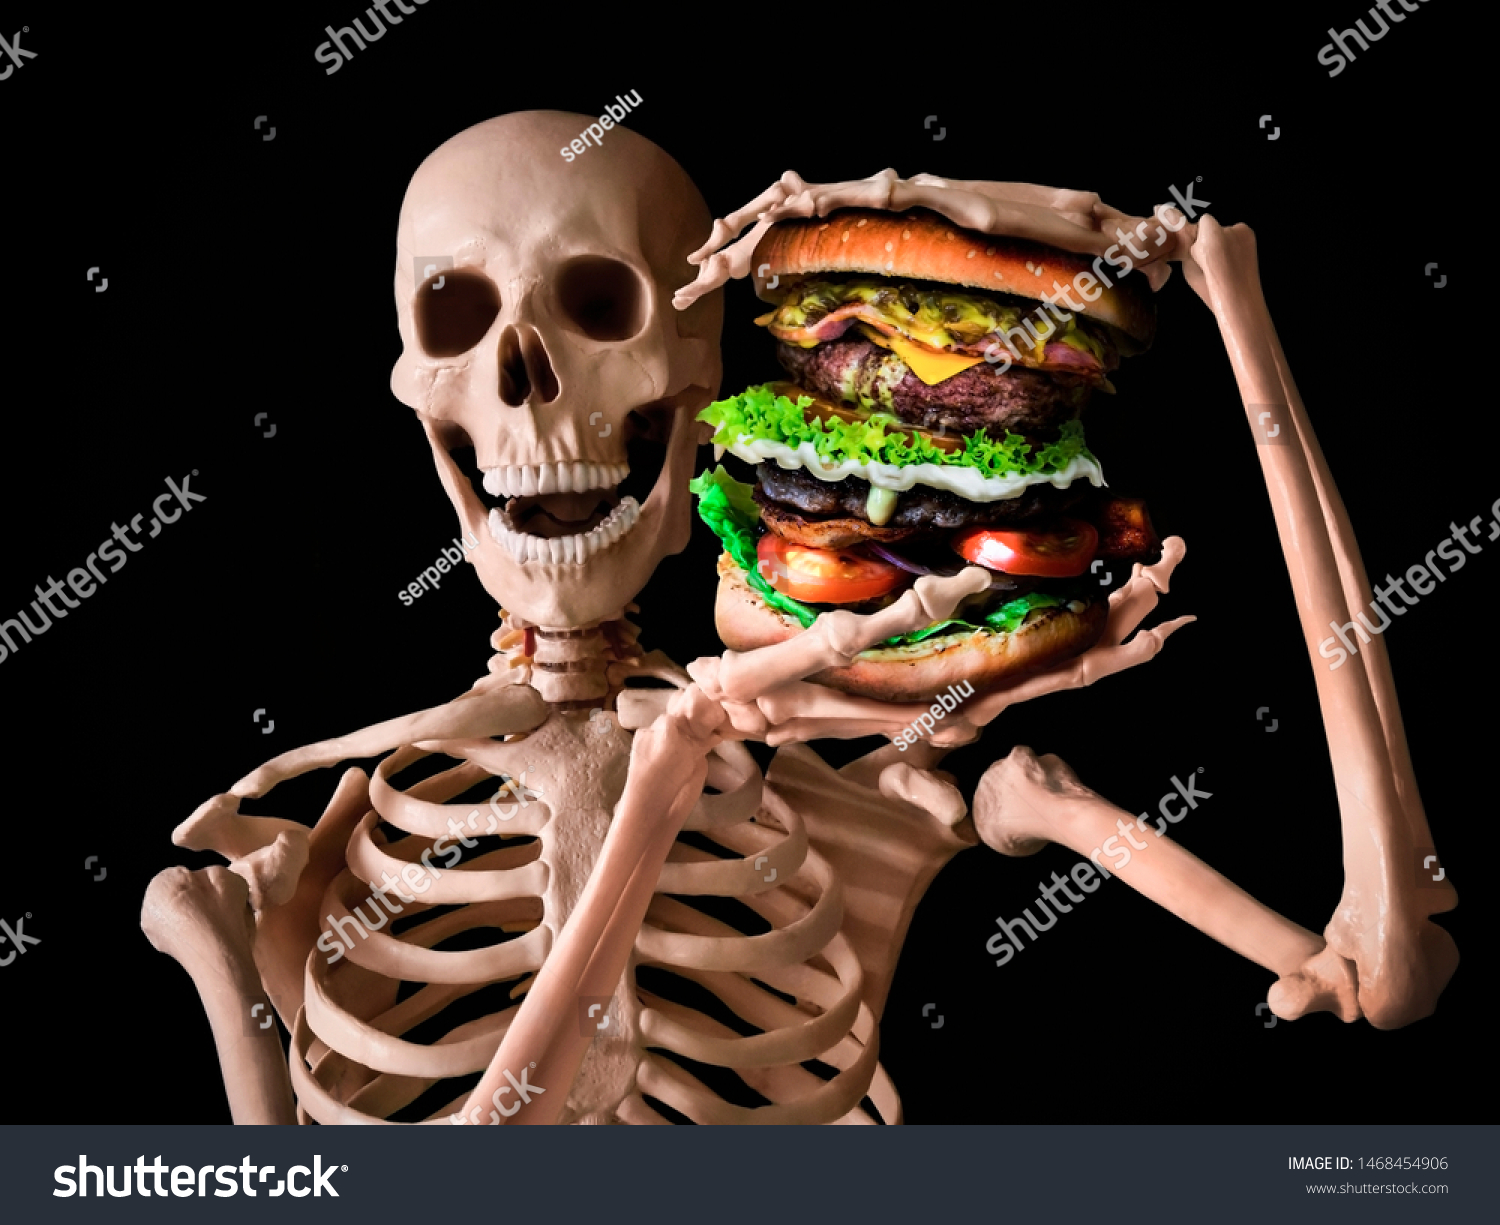 stock-photo-funny-skeleton-eating-deadly-junk-food-and-have-a-bad-lifestyle-1468454906.jpg